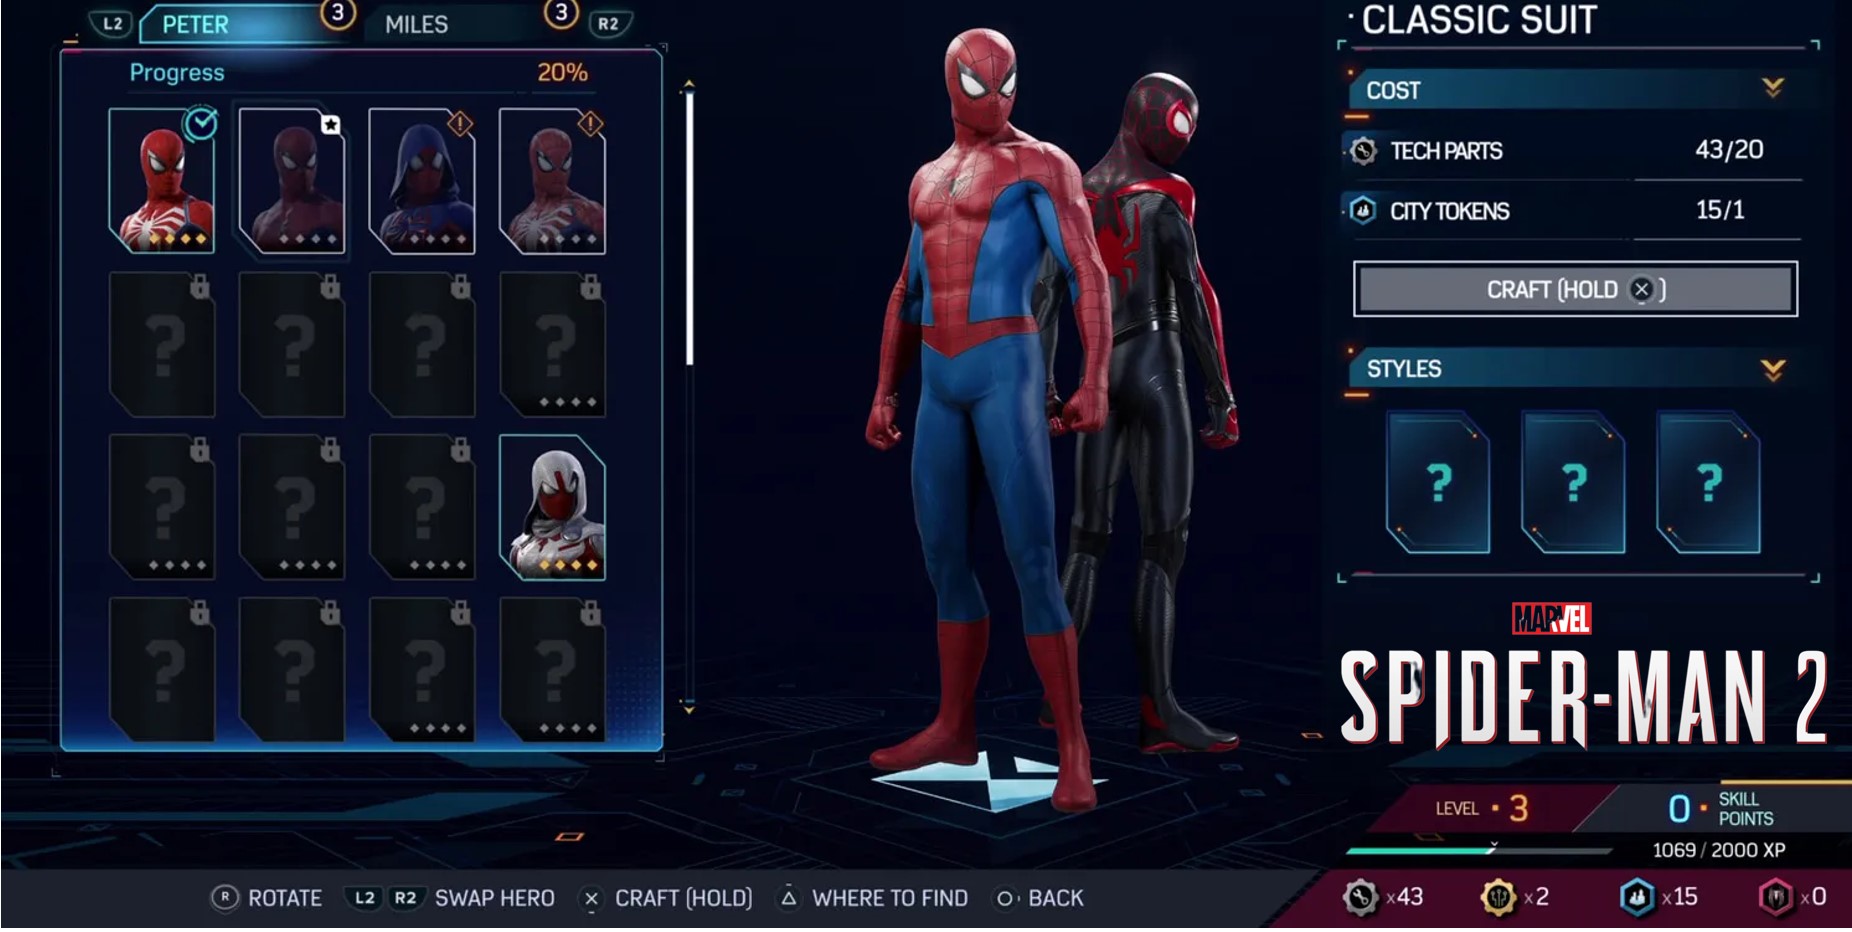 You Have to Craft Suits In Spider-Man 2